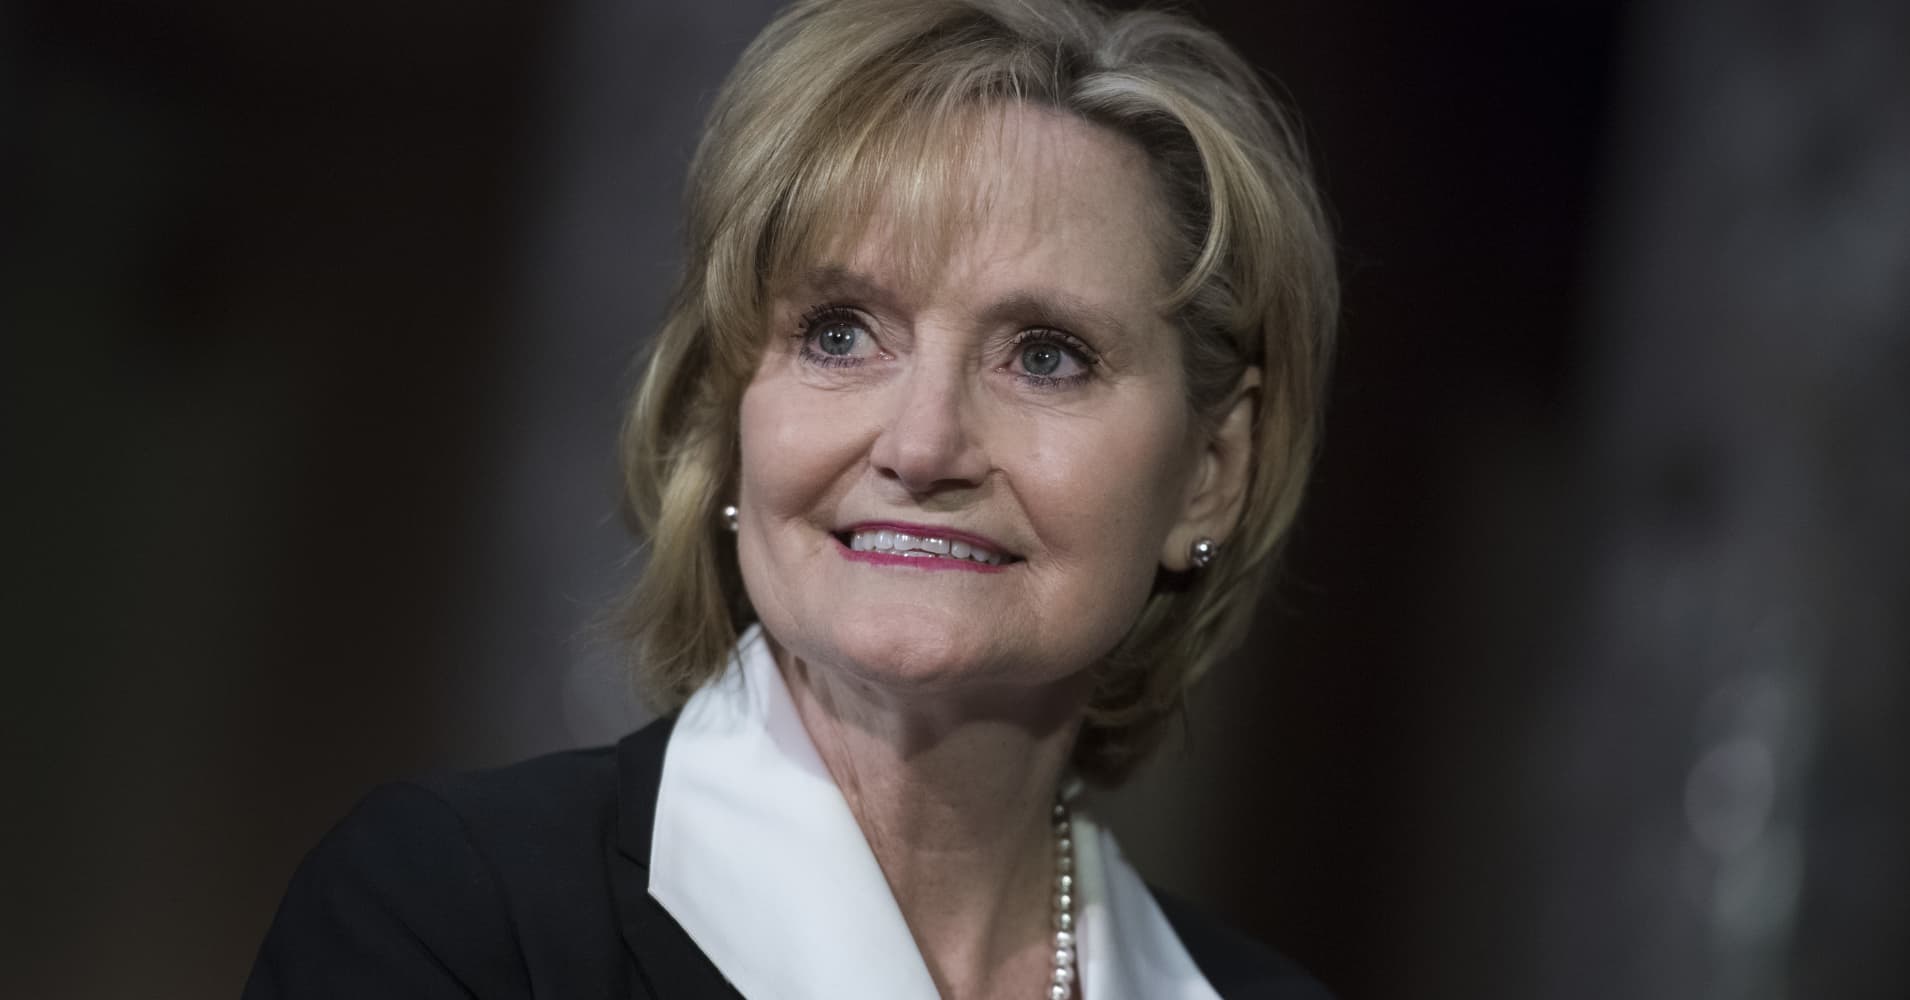 Walmart asks GOP Sen. Cindy Hyde-Smith for donation back because of hanging comment furor